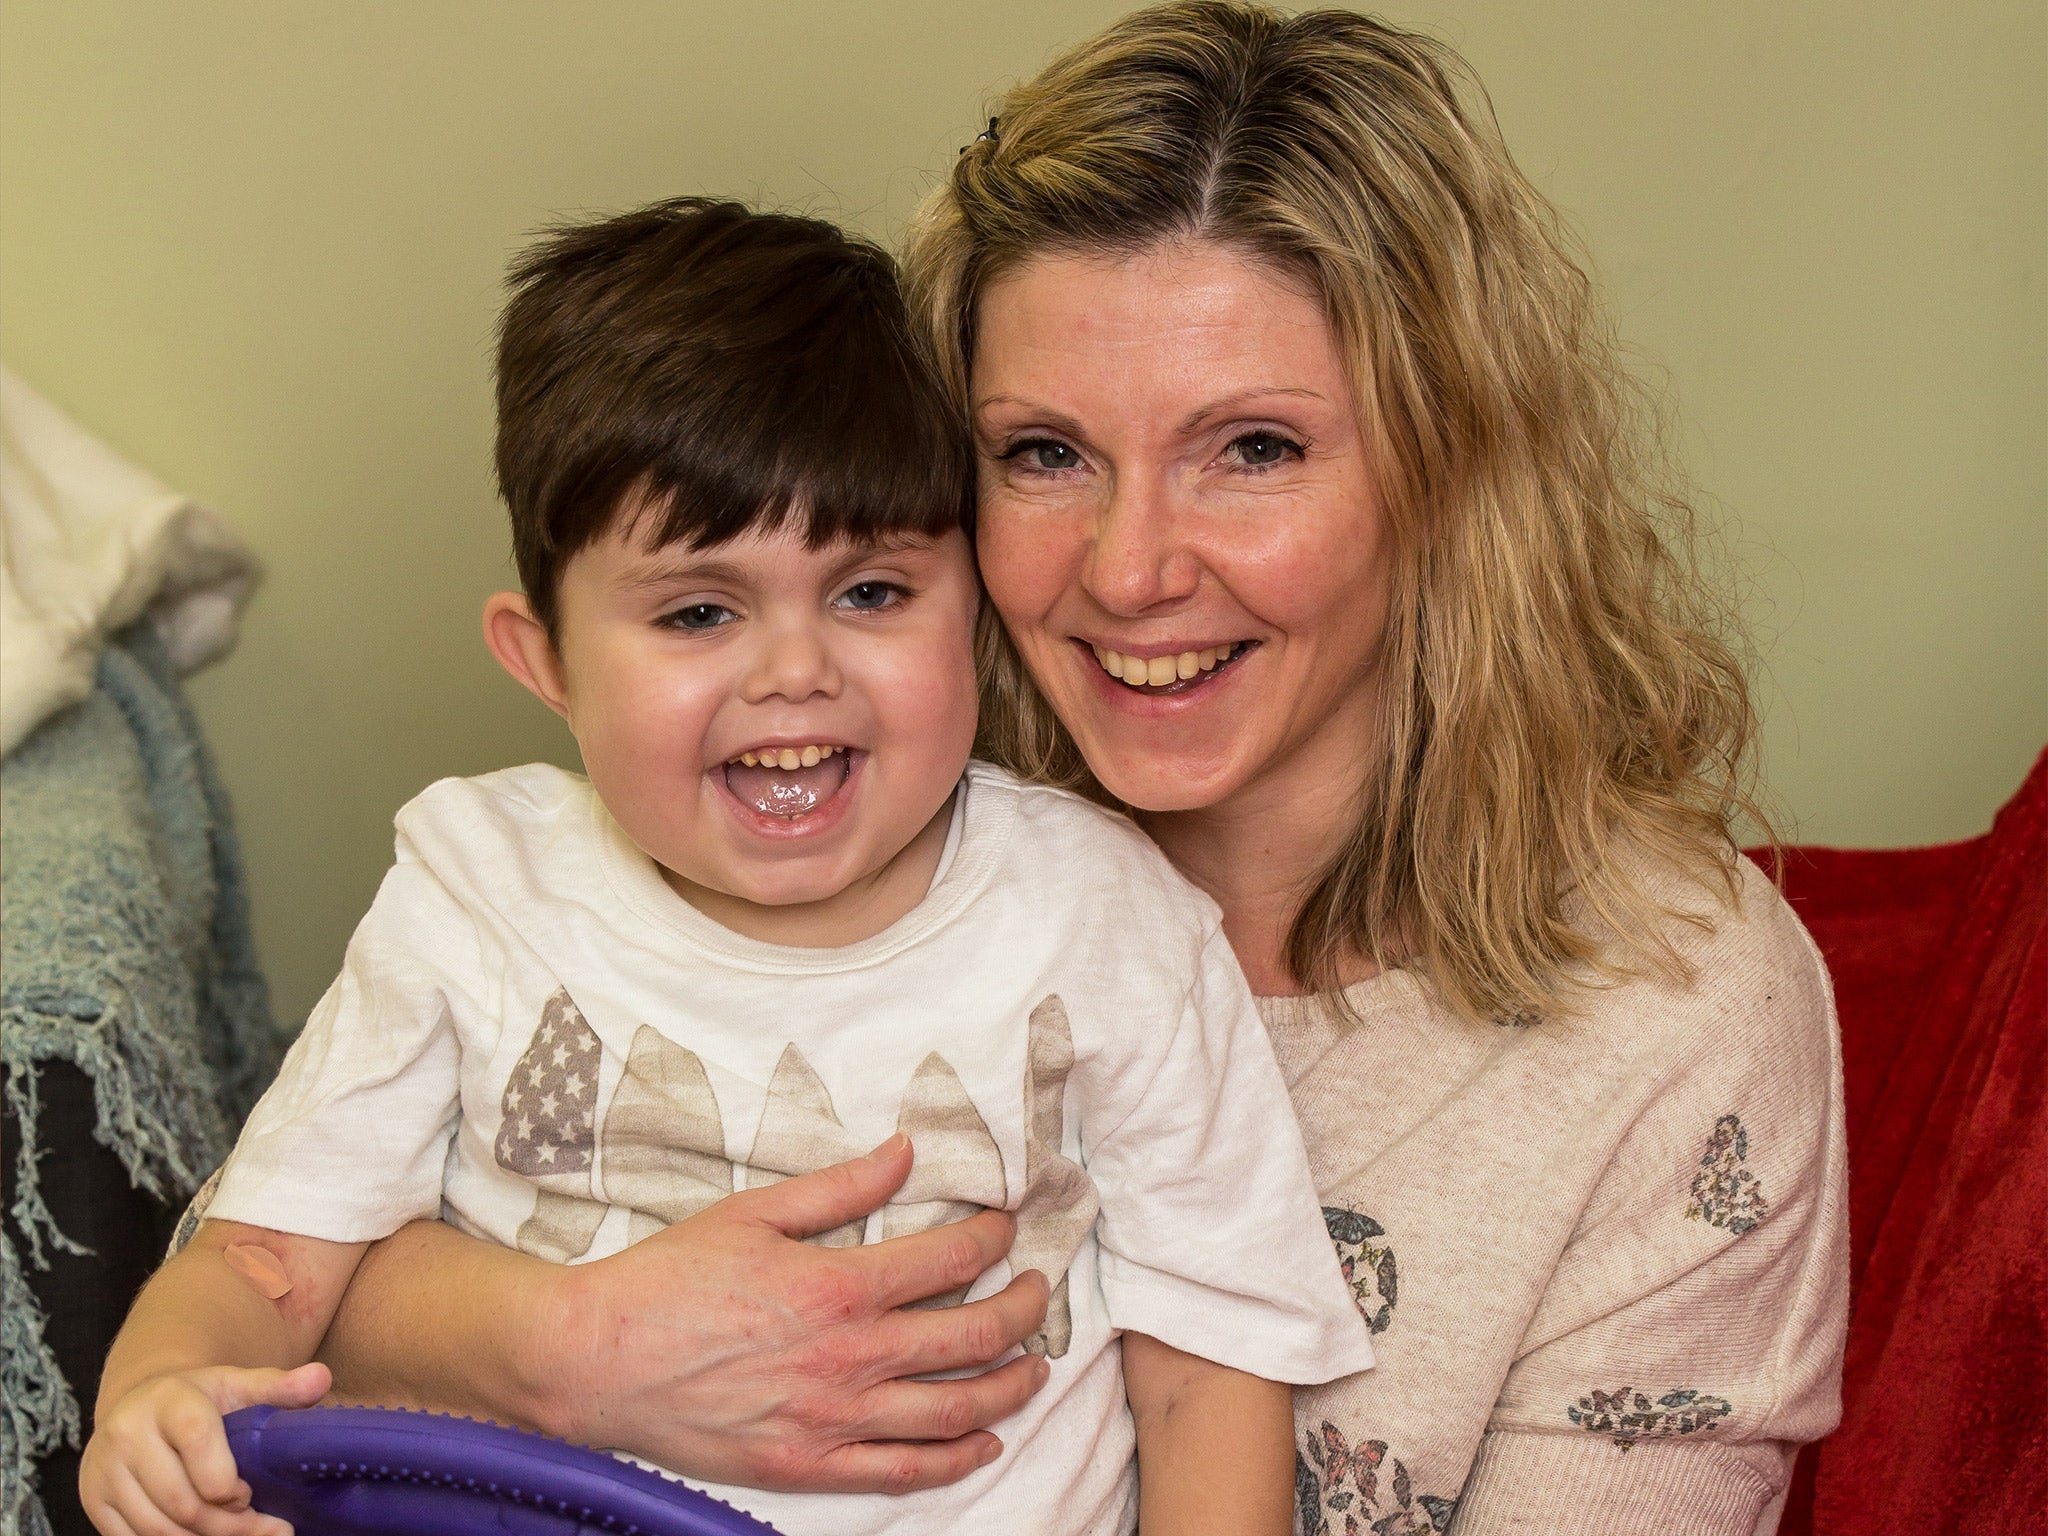 Jake Morgan and his mother, Samantha, are close to the care he needs in their new temporary home